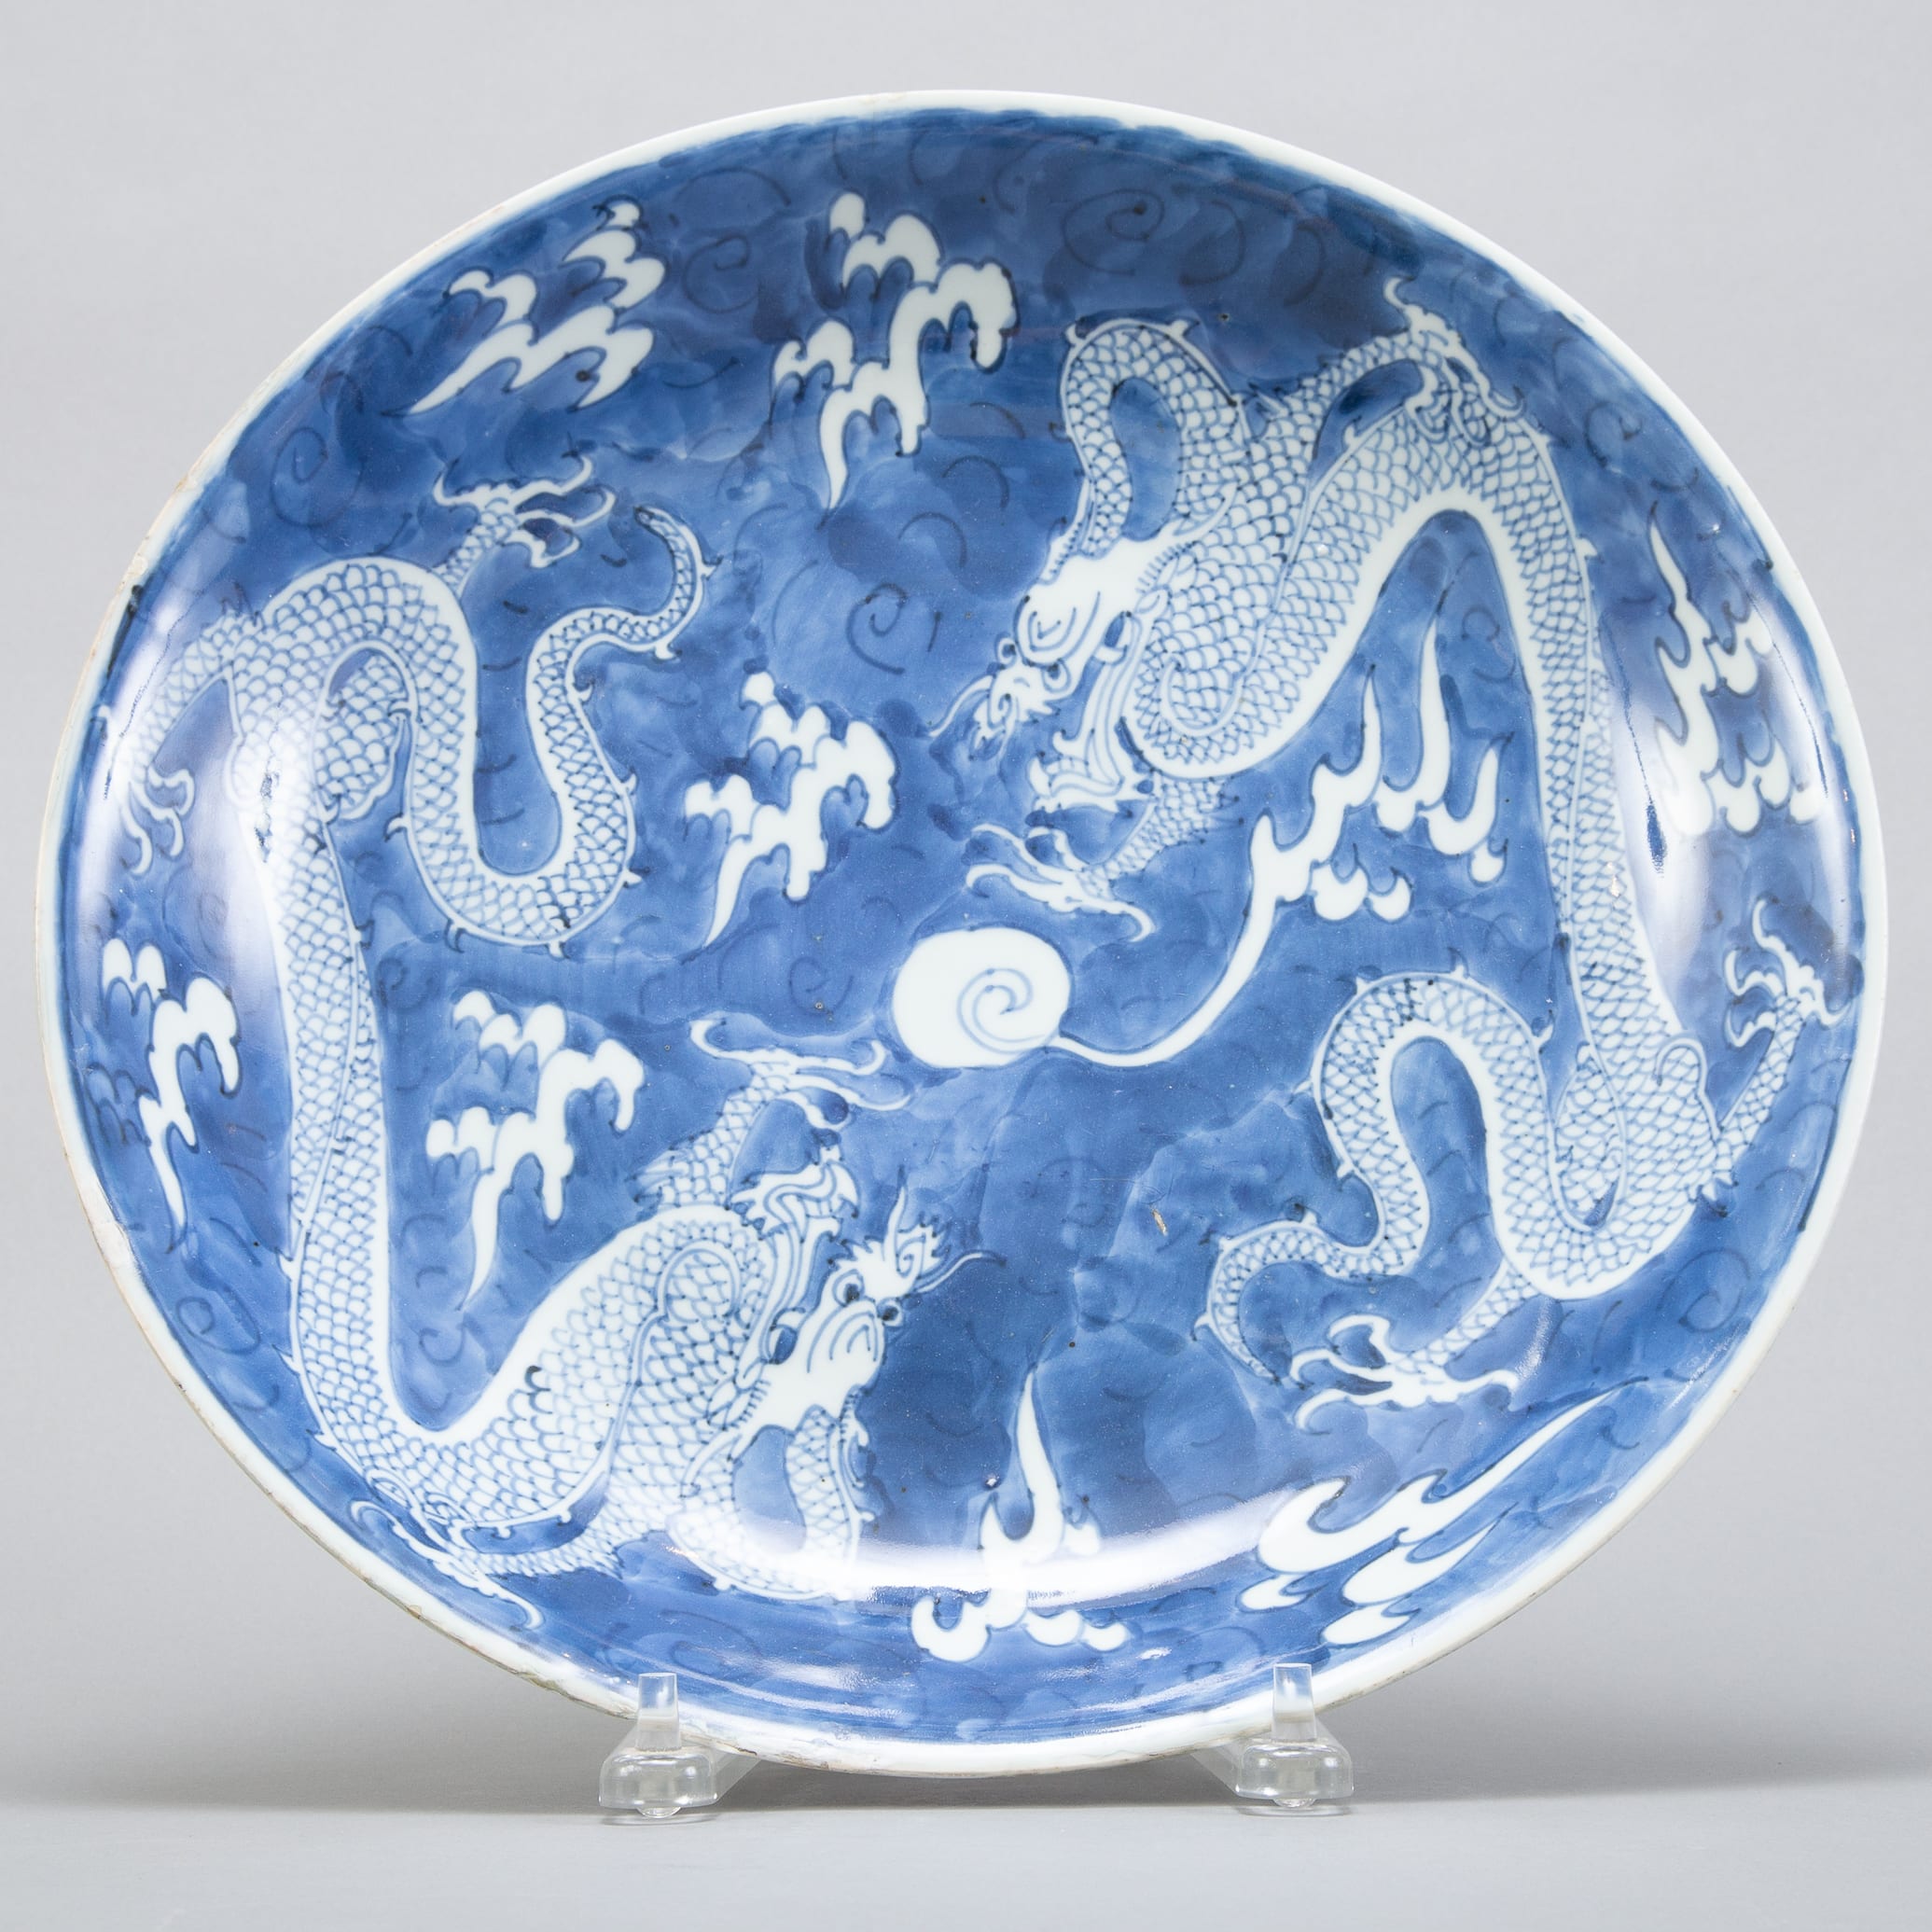 Lot 272: 19th c. Chinese Porcelain Dragon Charger